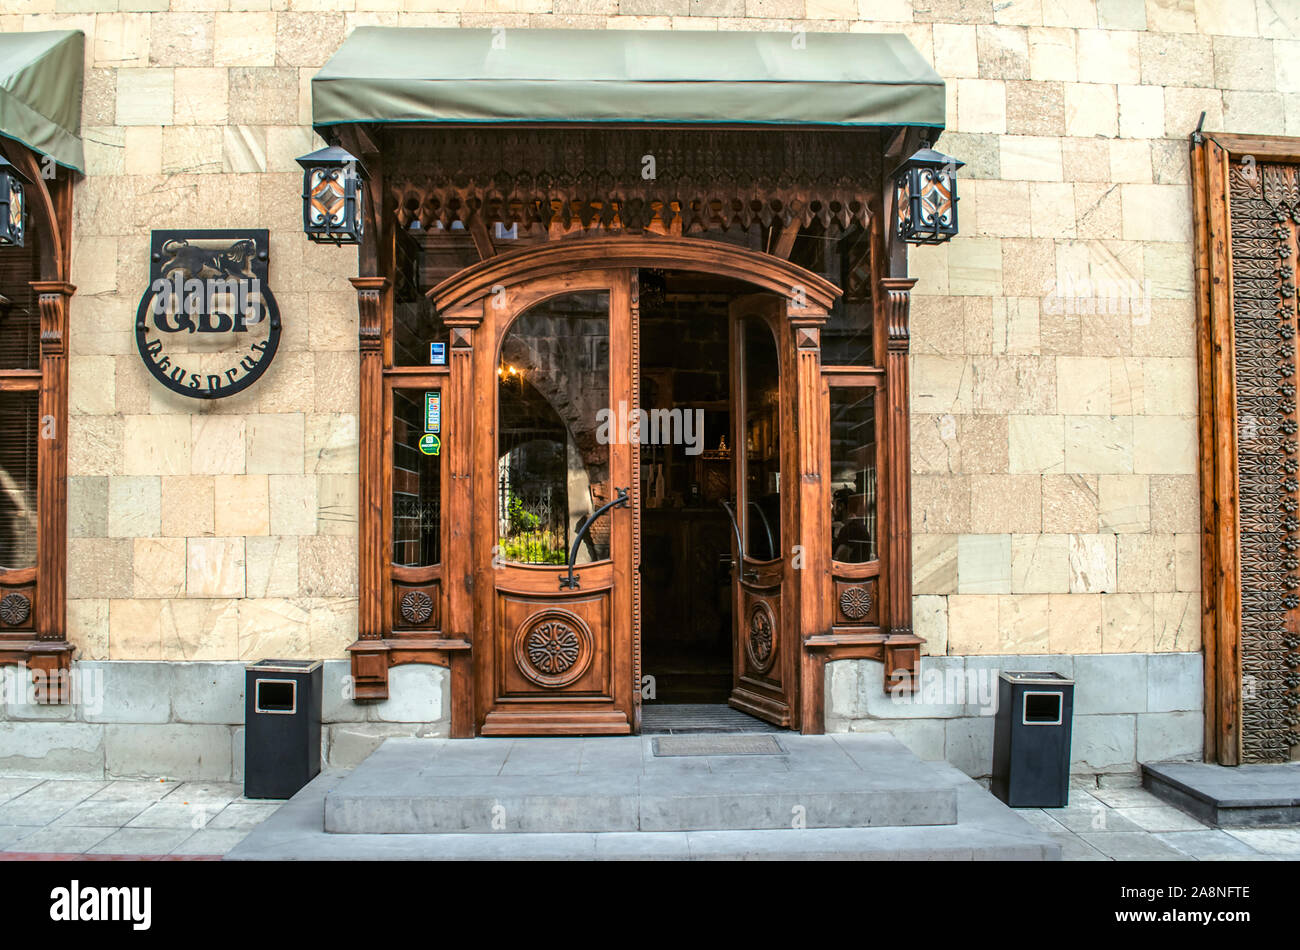 Gyumri,Armenia,05 September,2019: Entrance to the restaurant is through a double wooden door decorated with carved ornaments and a cornice in a buildi Stock Photo